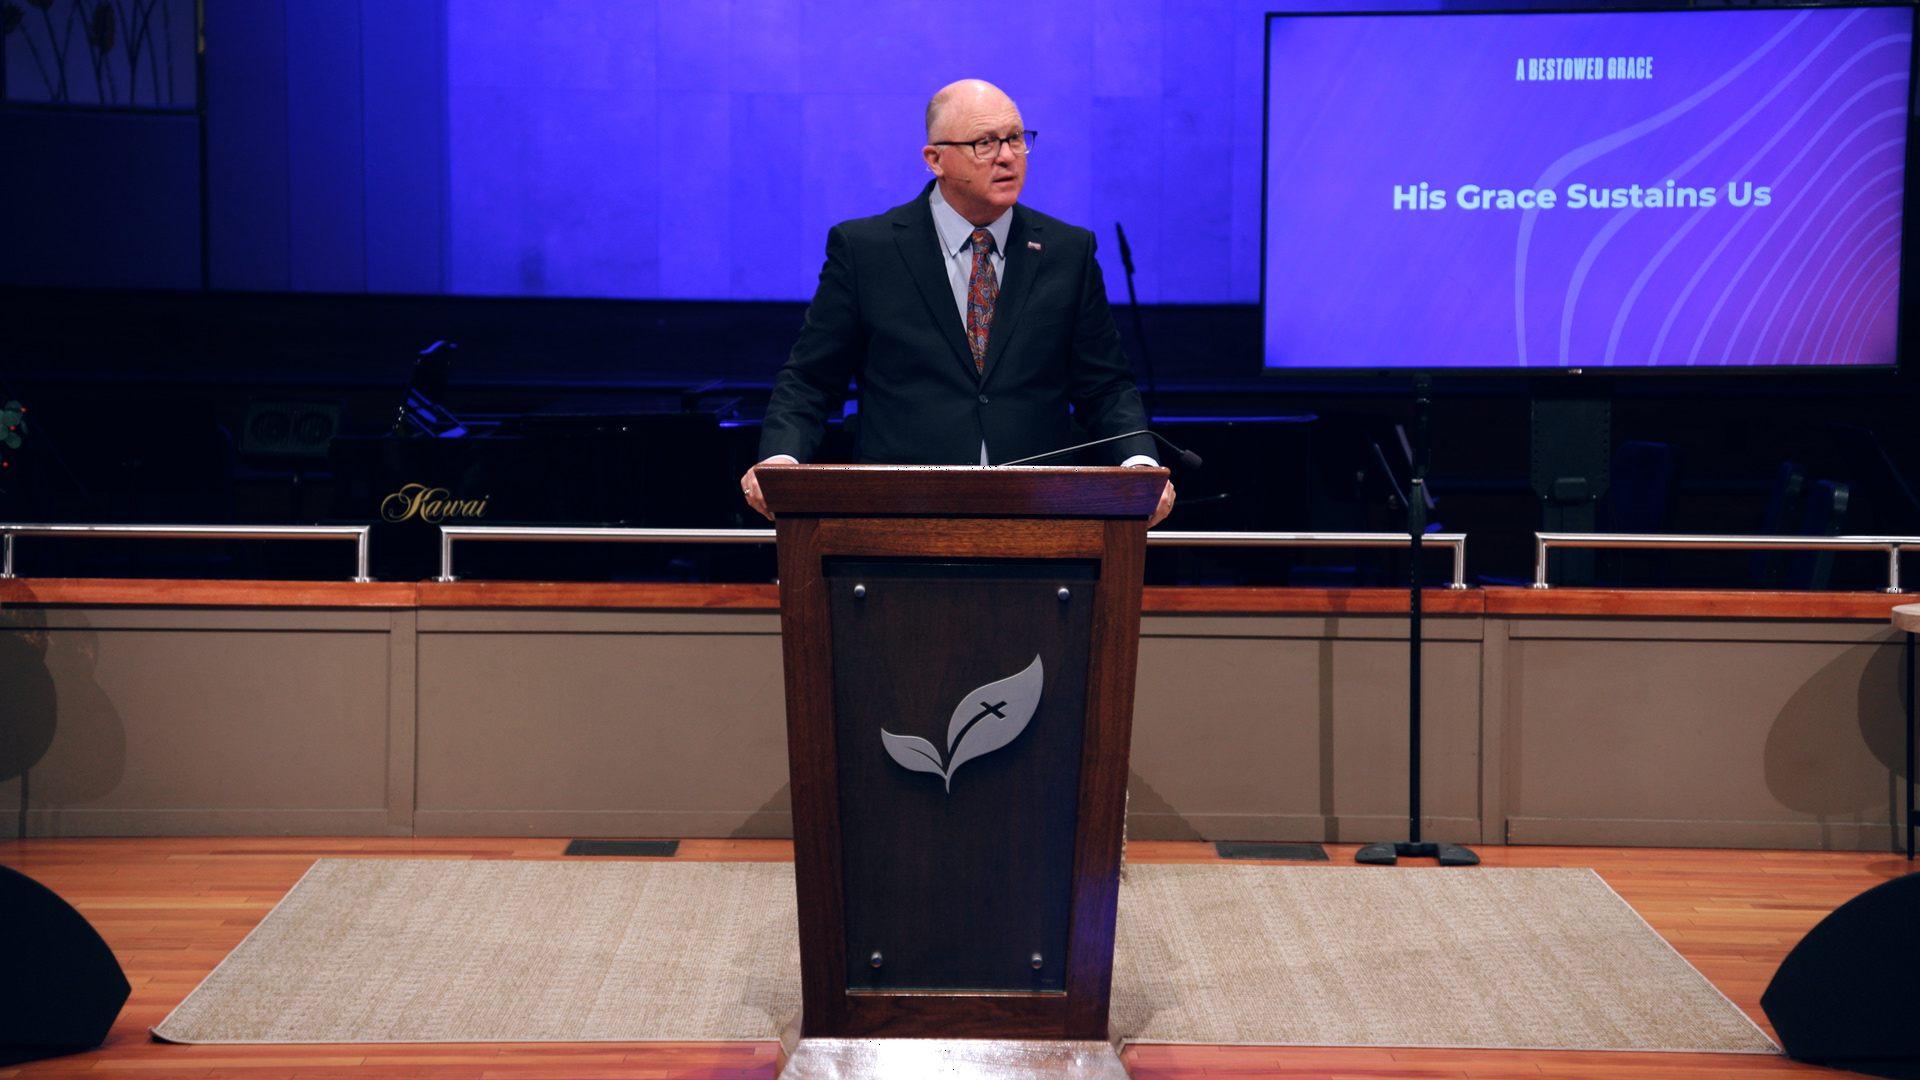 Pastor Paul Chappell: A Conviction For Courageous Stewardship